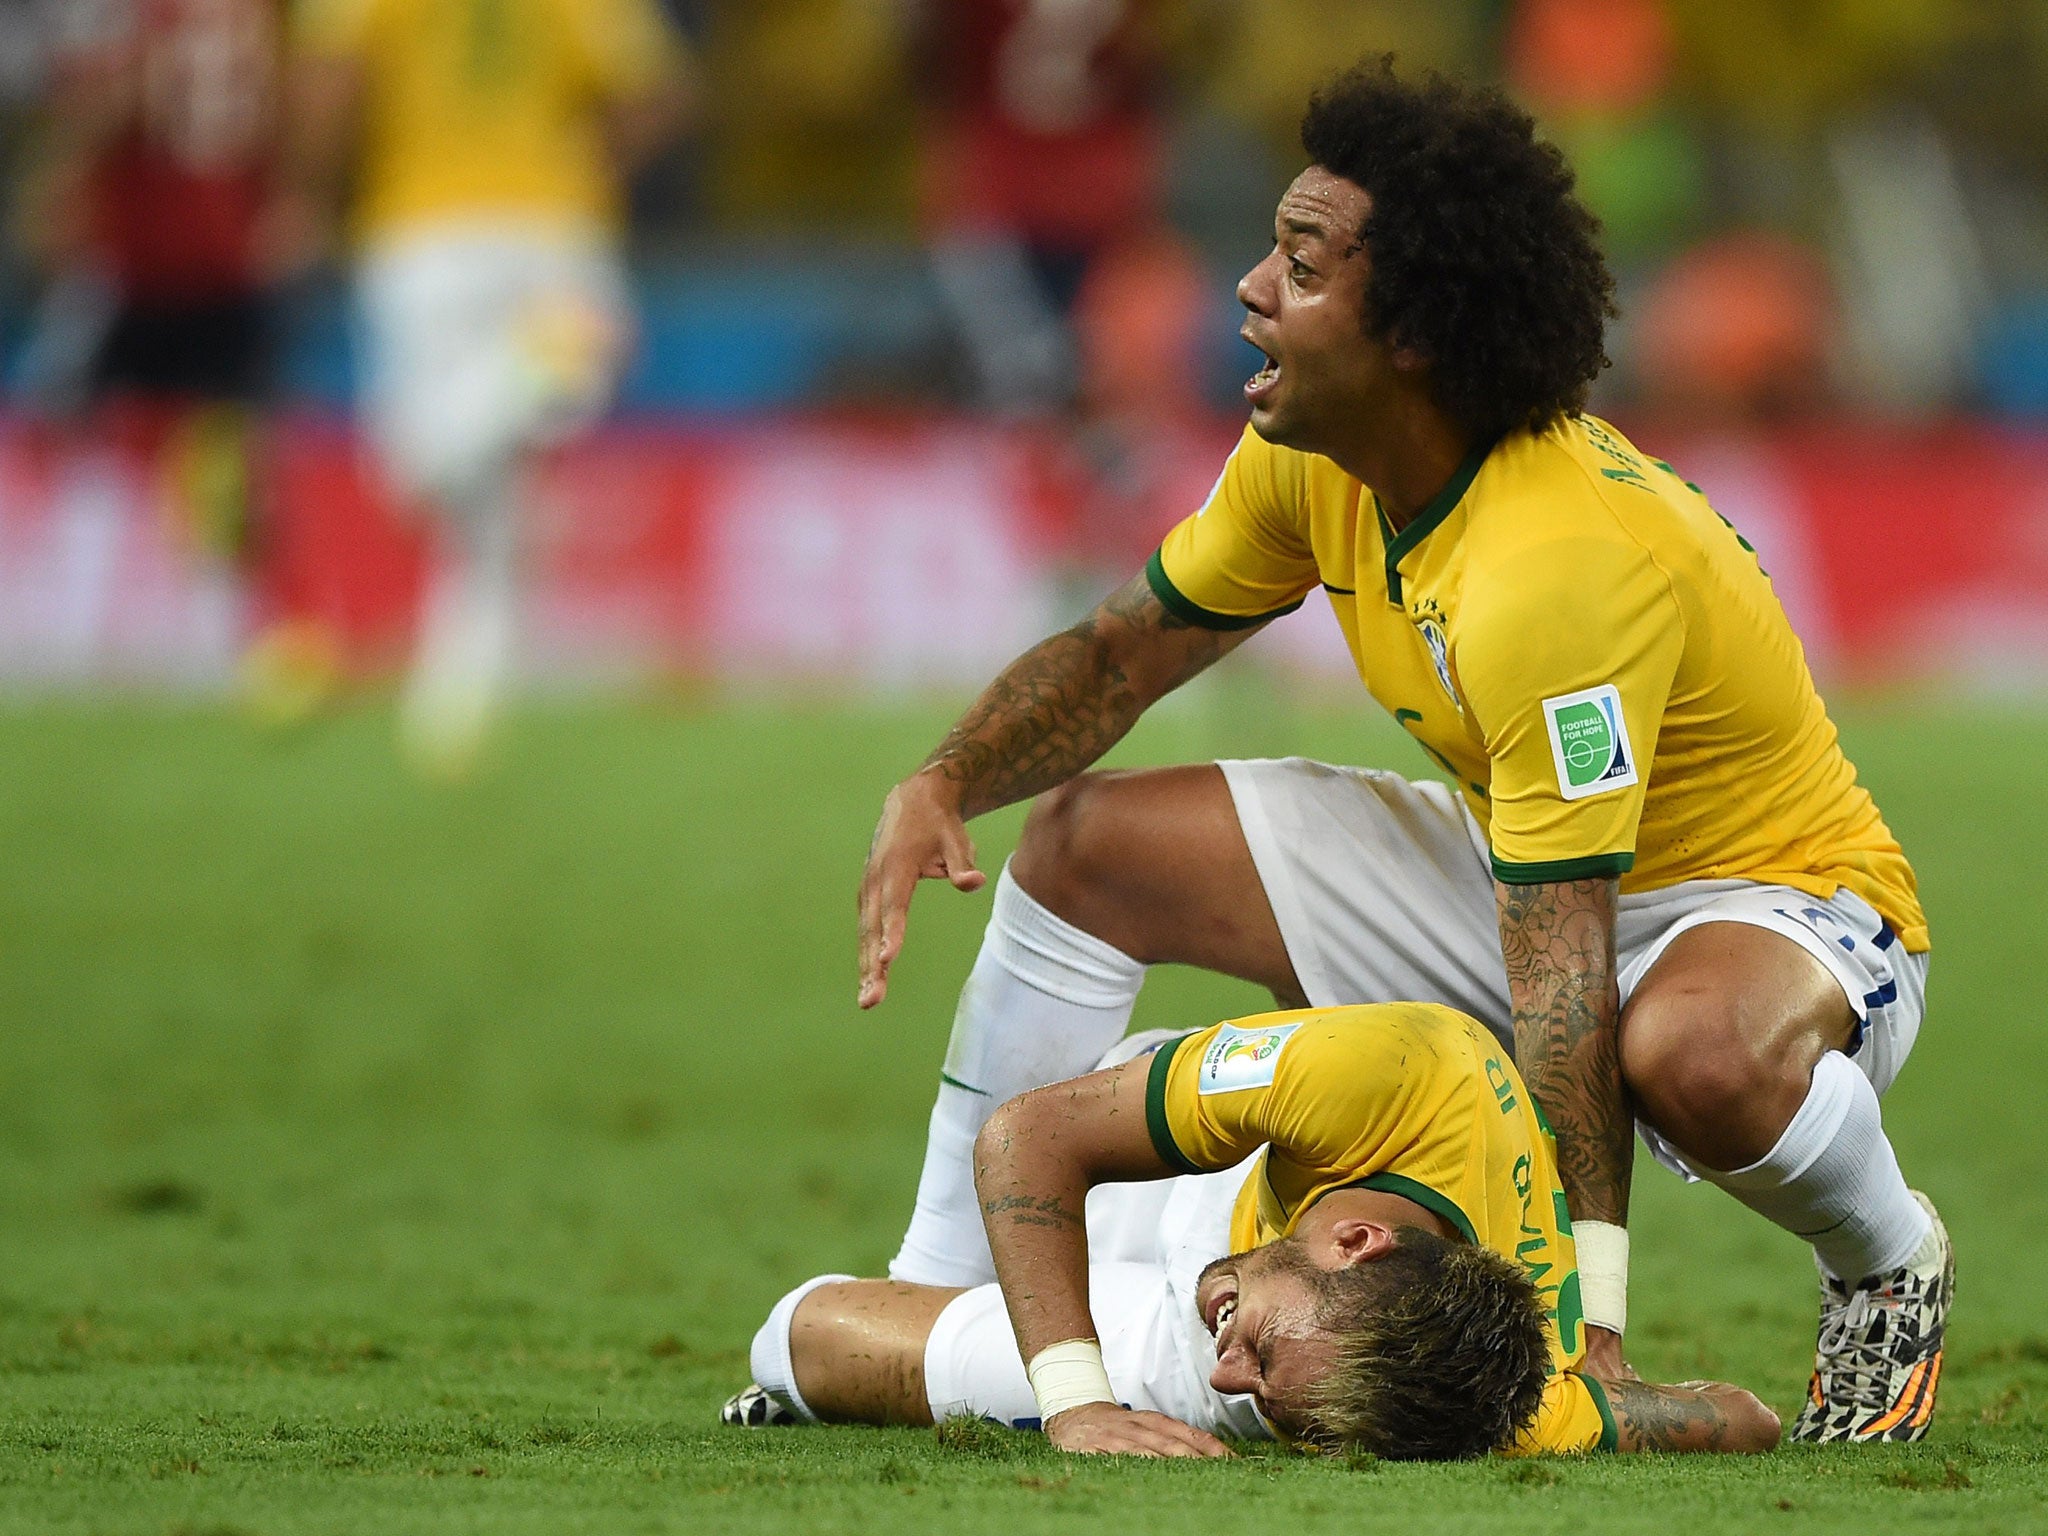 Marcelo comes to the aid of his team-mate